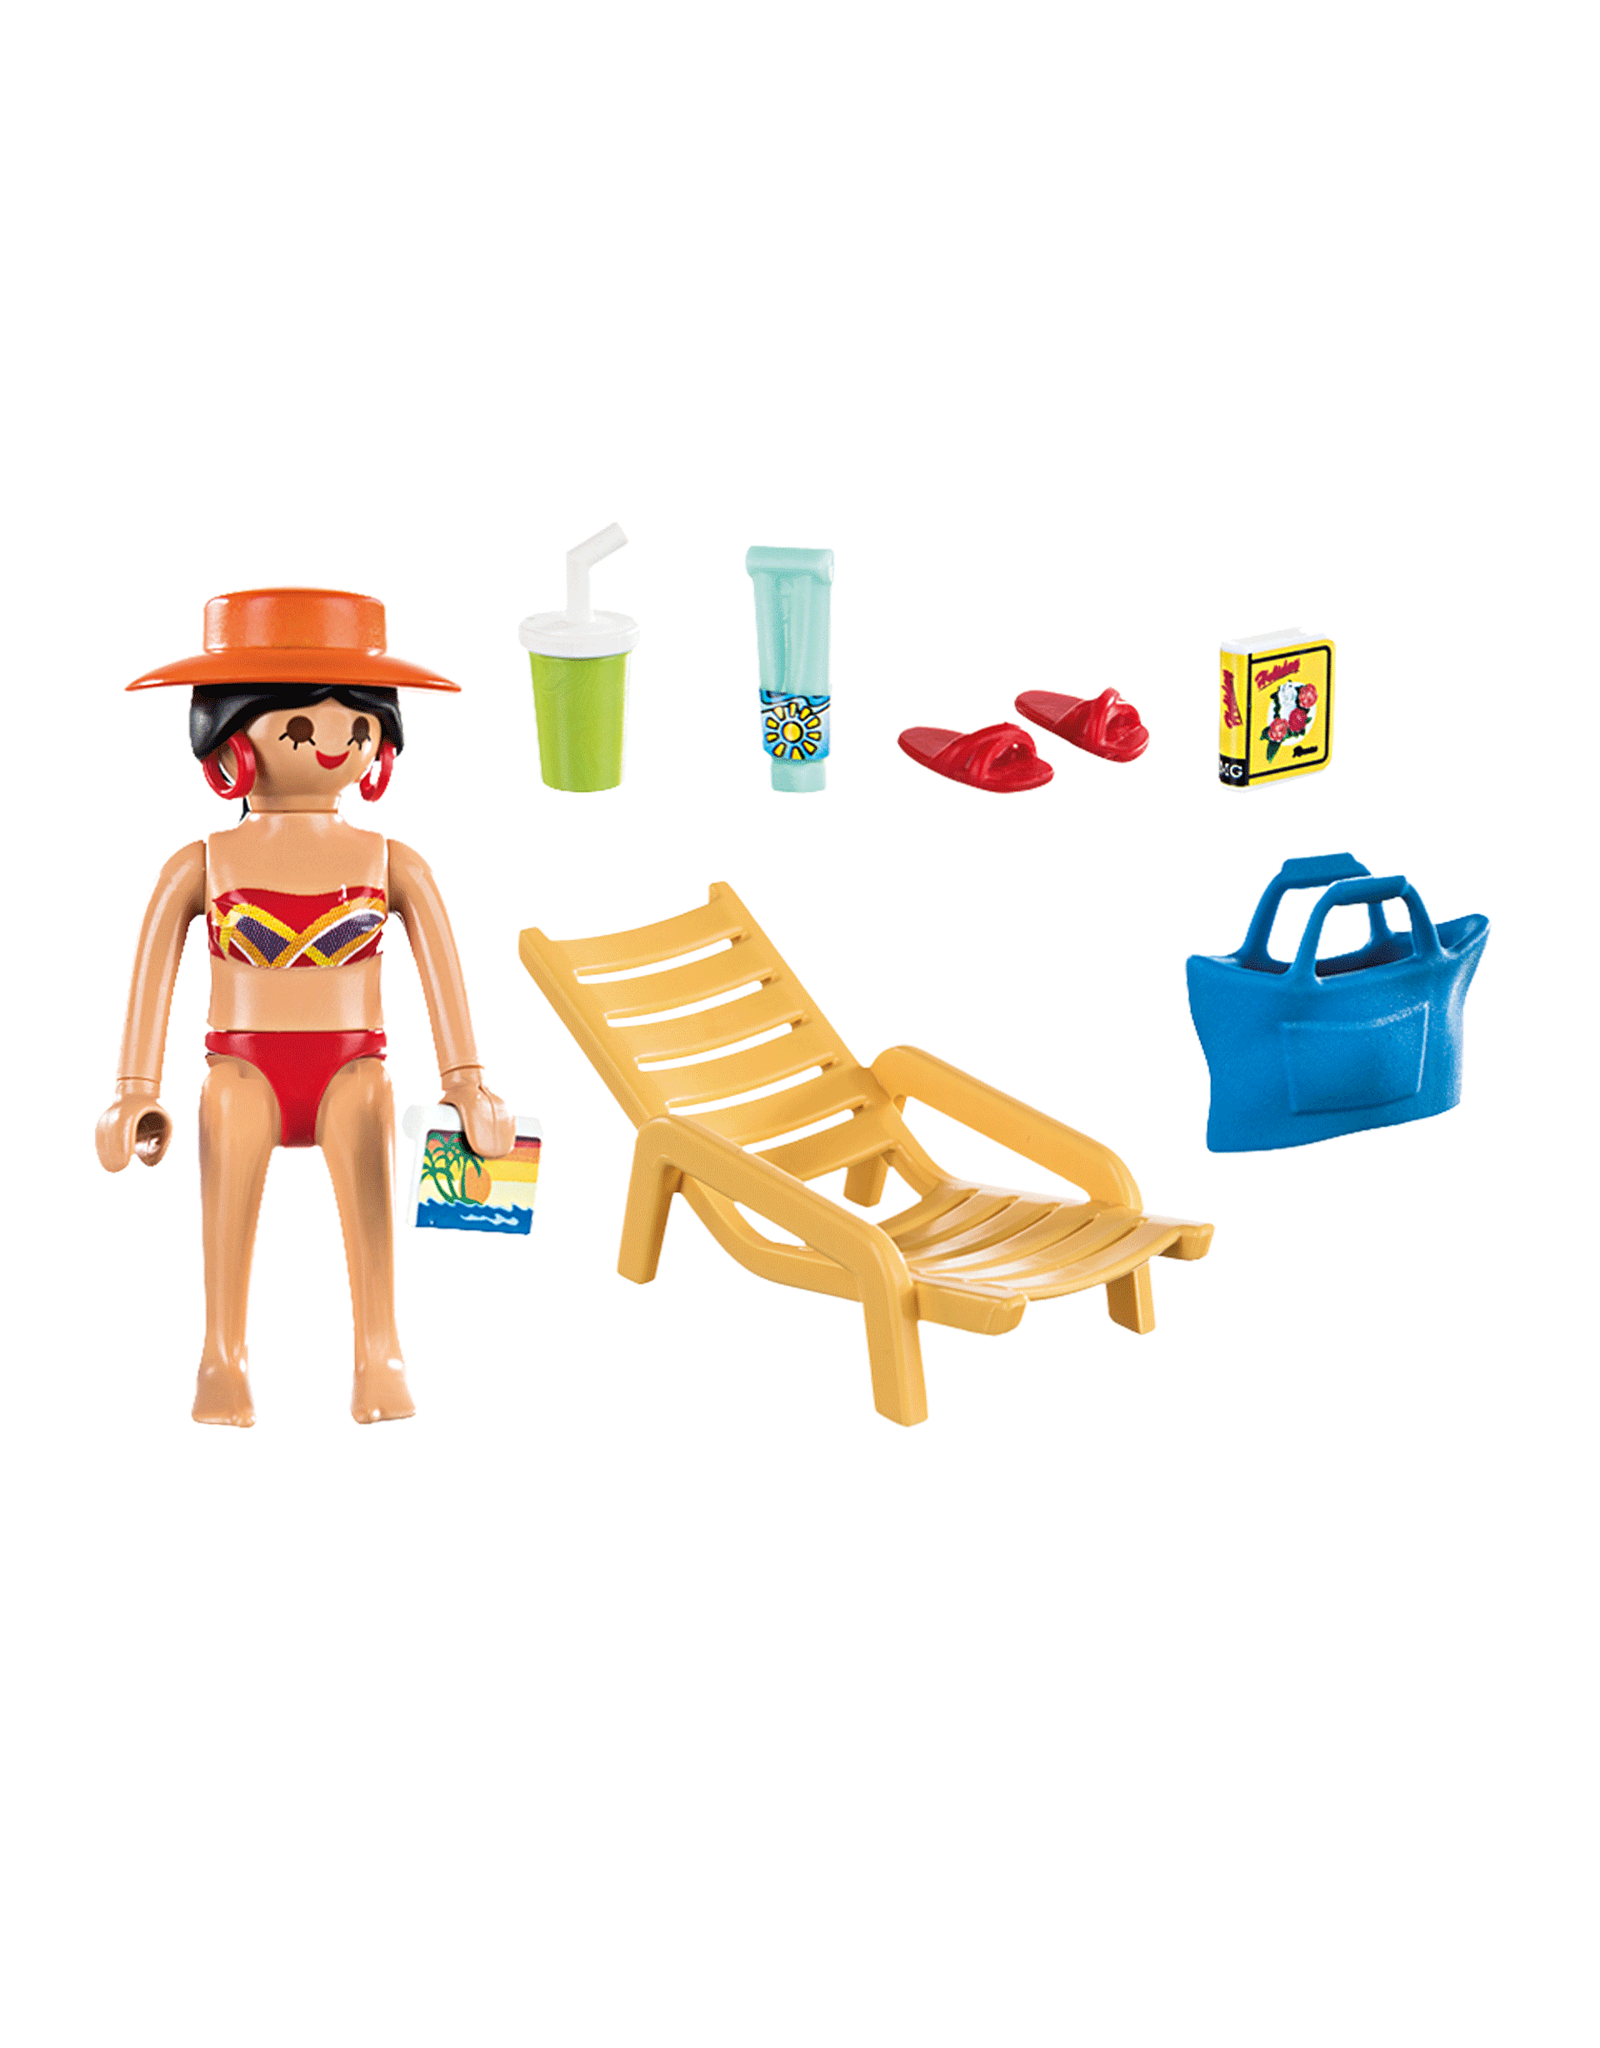 Playmobil Sunbather with Lounge Chair